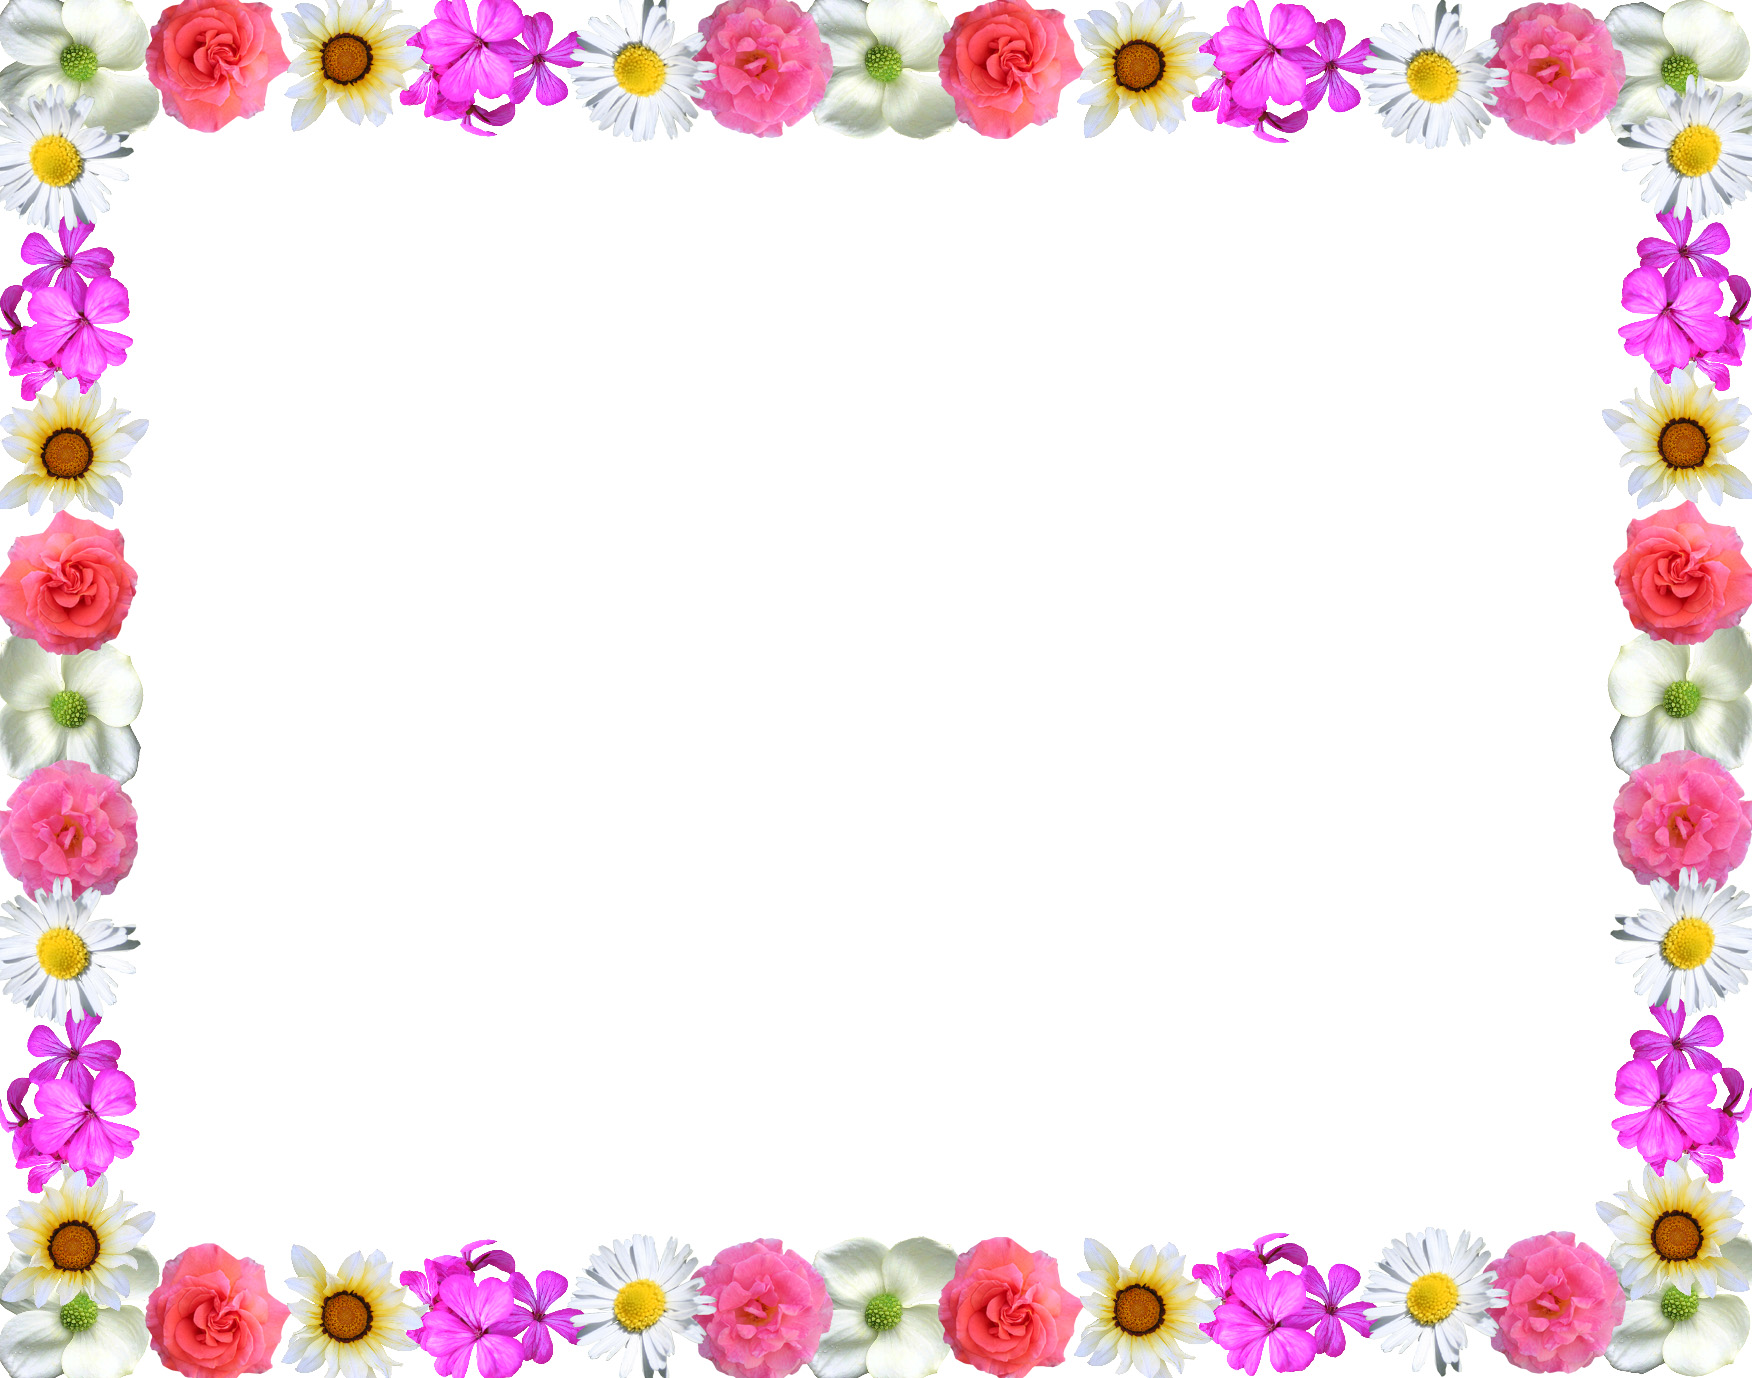 Search Results Animal Border Designs - Frame